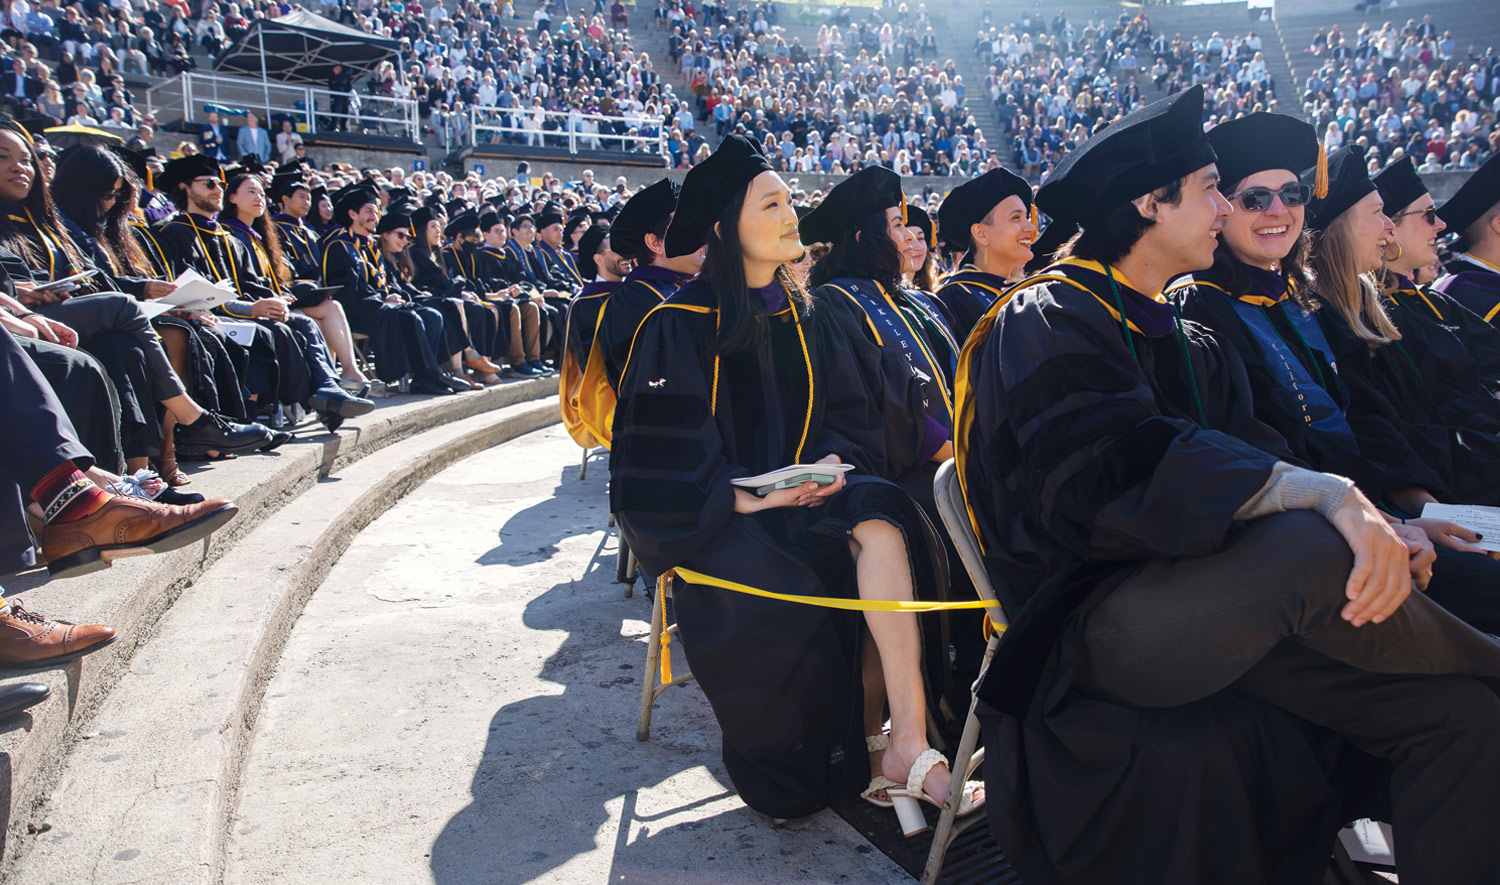 commencement ceremony with students seated